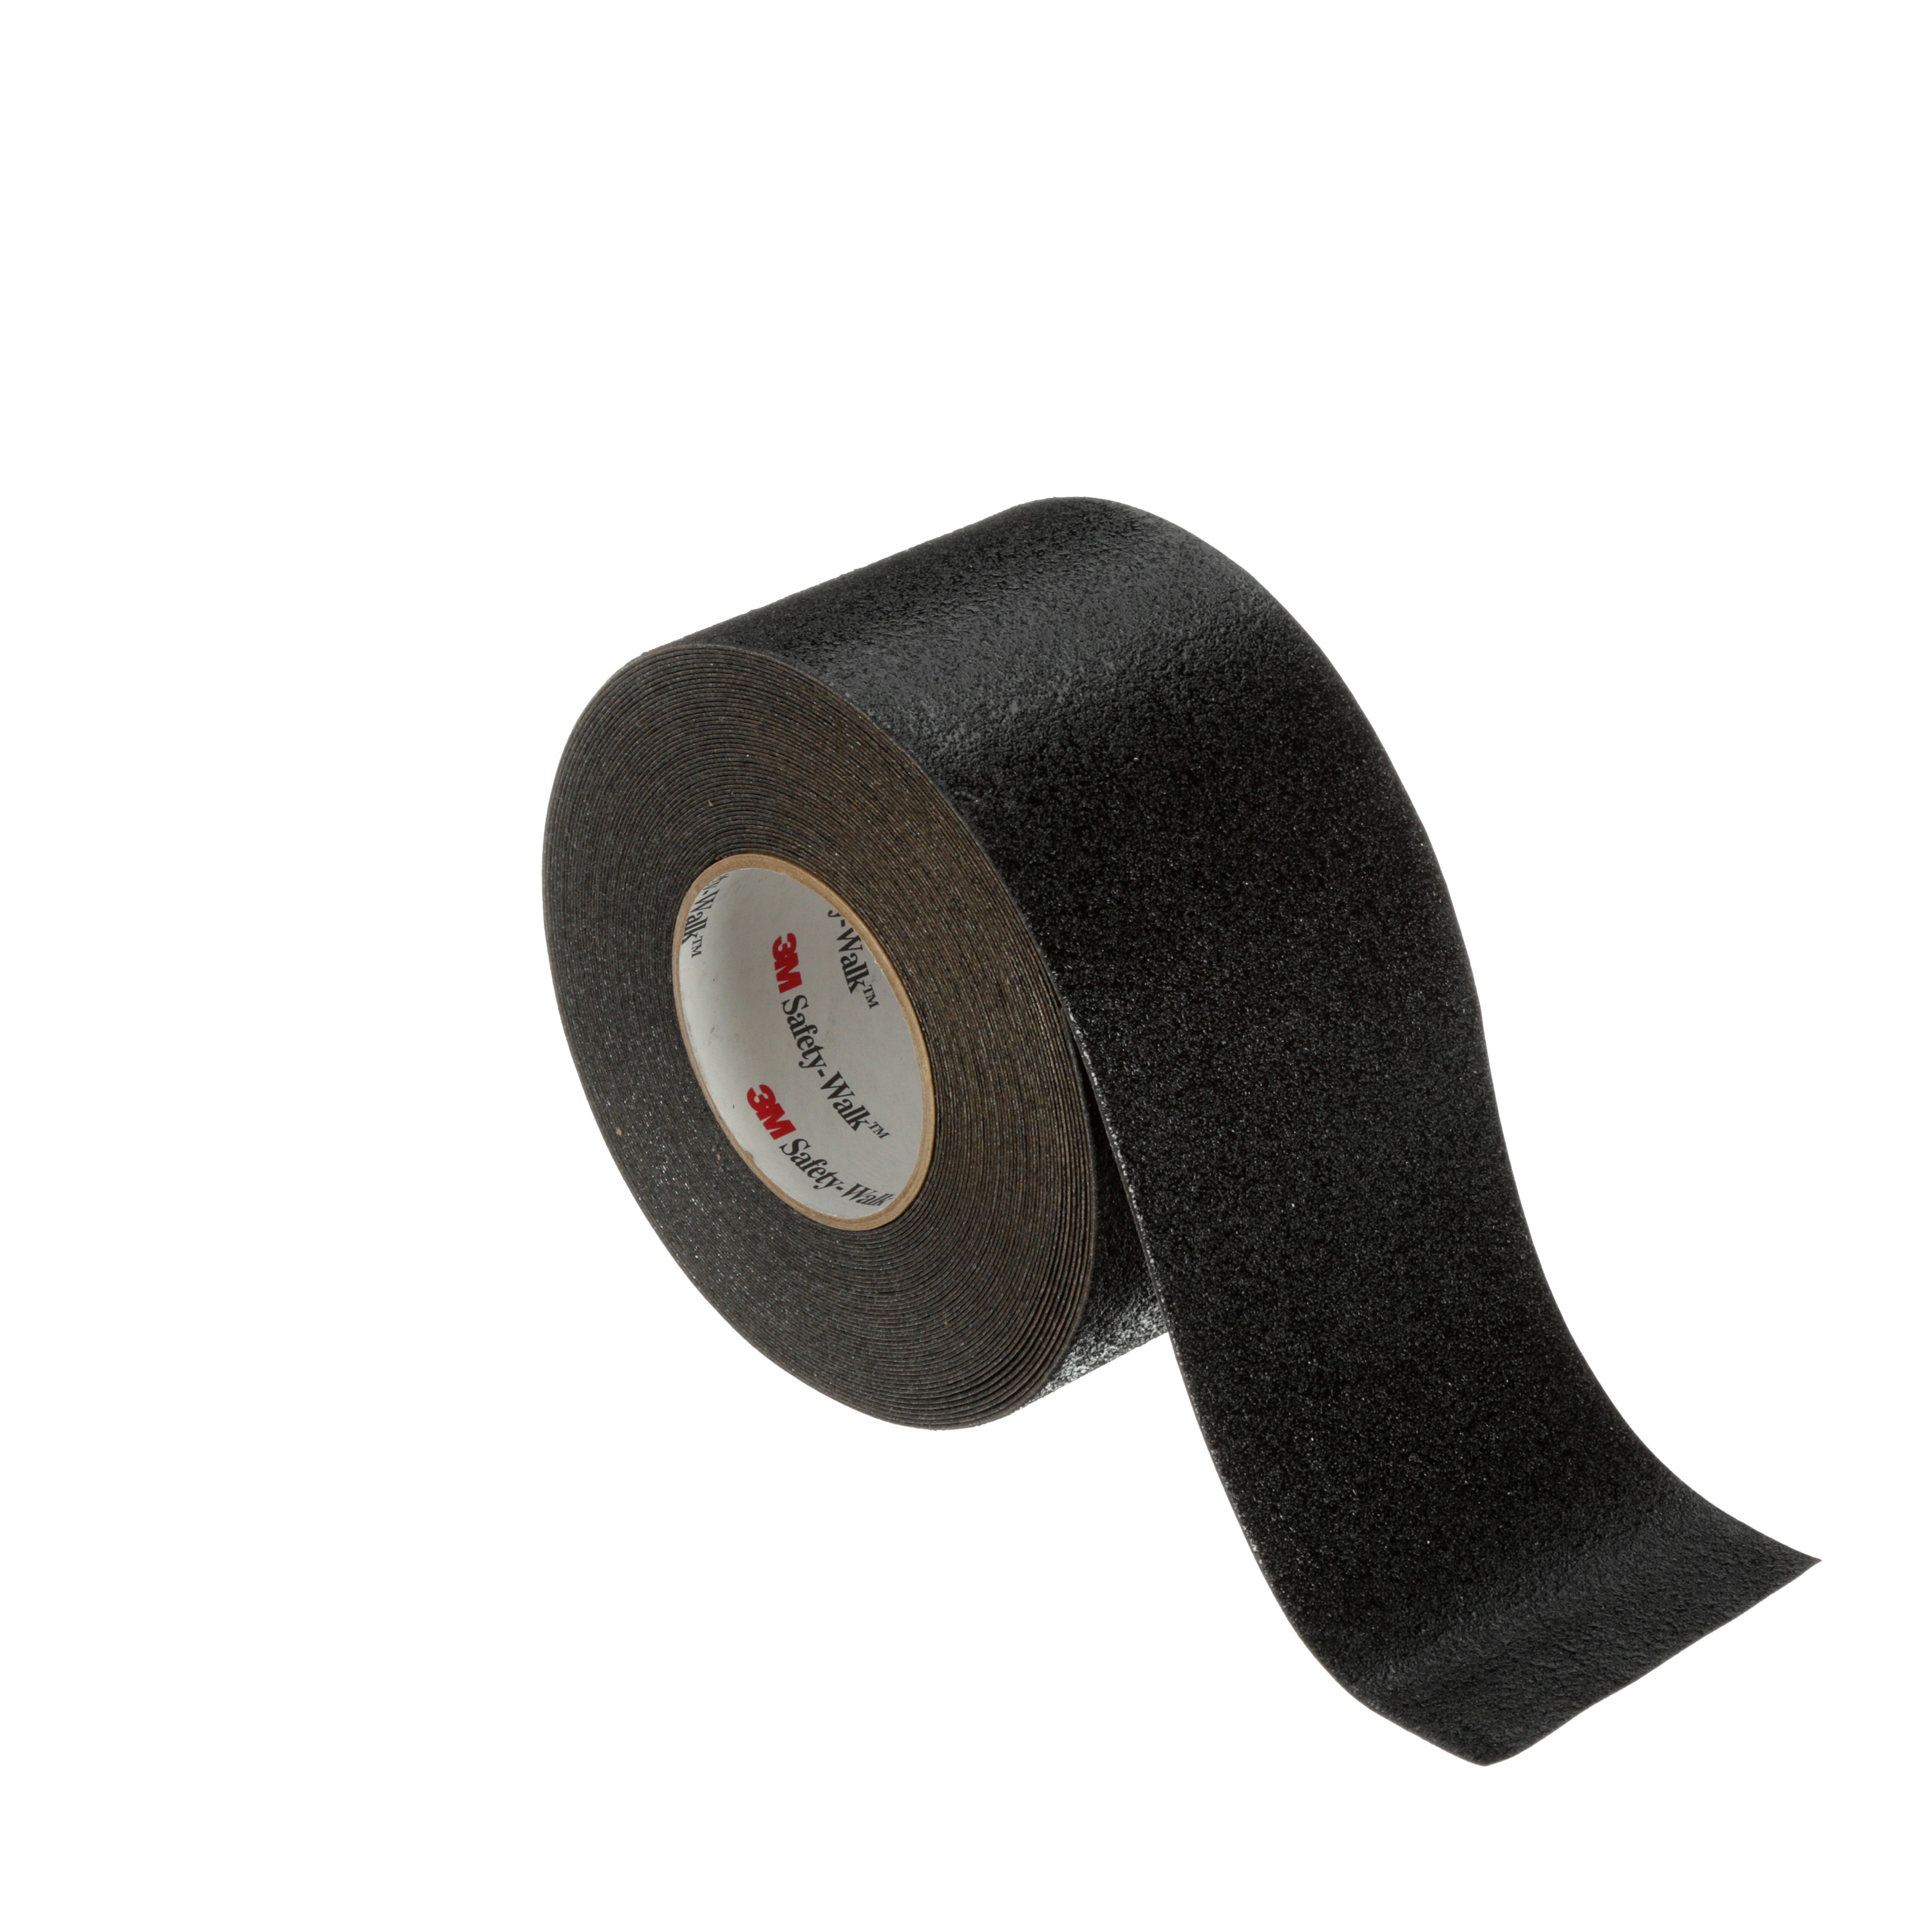 3M™ Safety-Walk™ Slip-Resistant Conformable Tapes & Treads 510, Black, 4
in x 60 ft, Roll, 1/Case